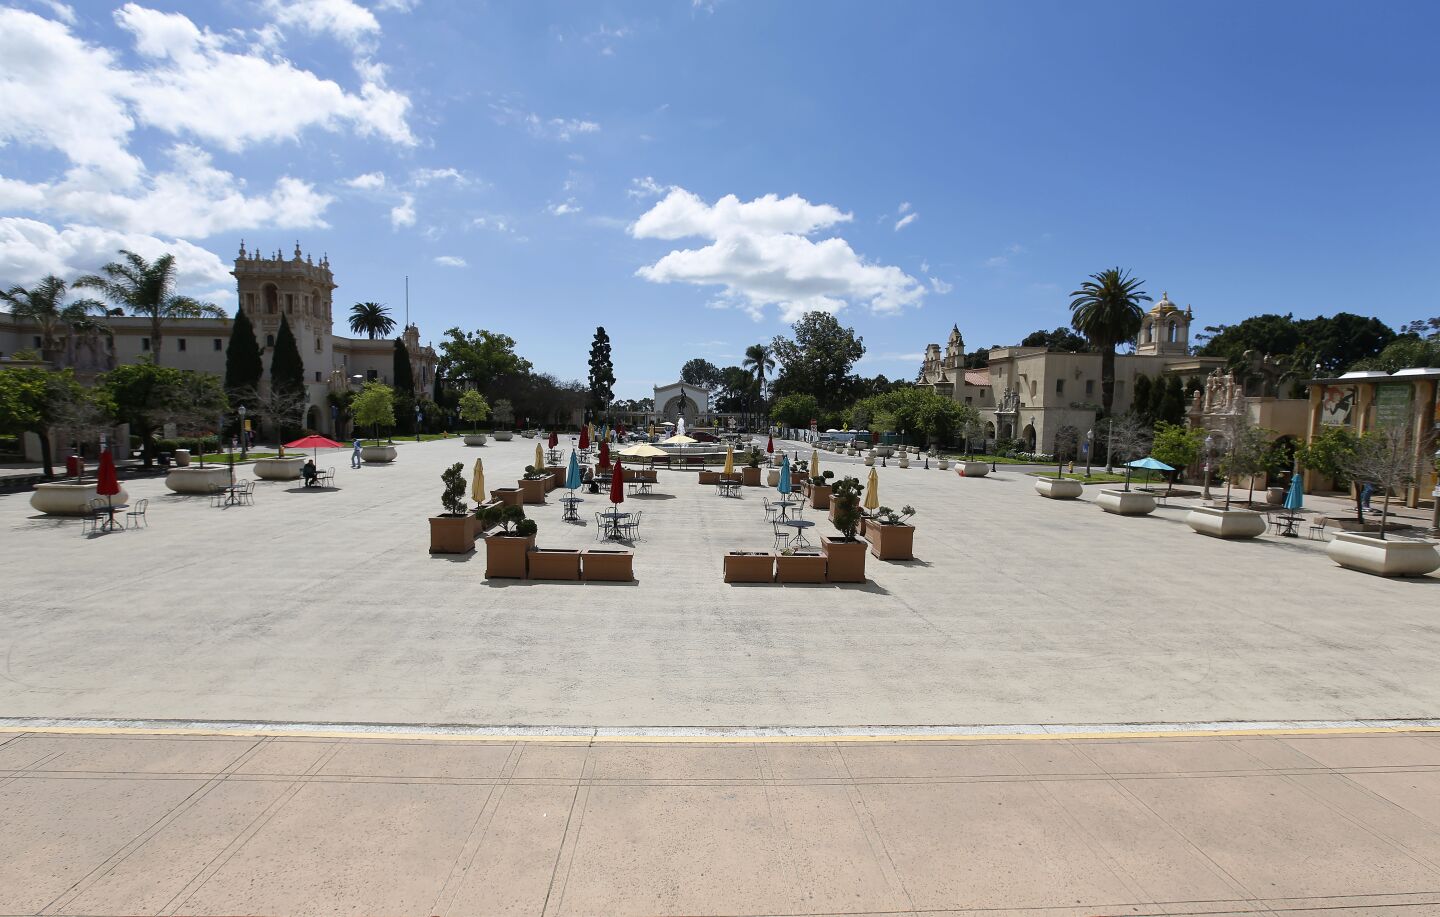 Plaza de Panama in Balboa Park is virtually empty on March 24, 2020. San Diego Mayor Kevin Faulconer closed all beaches and parks due to the coronavirus.